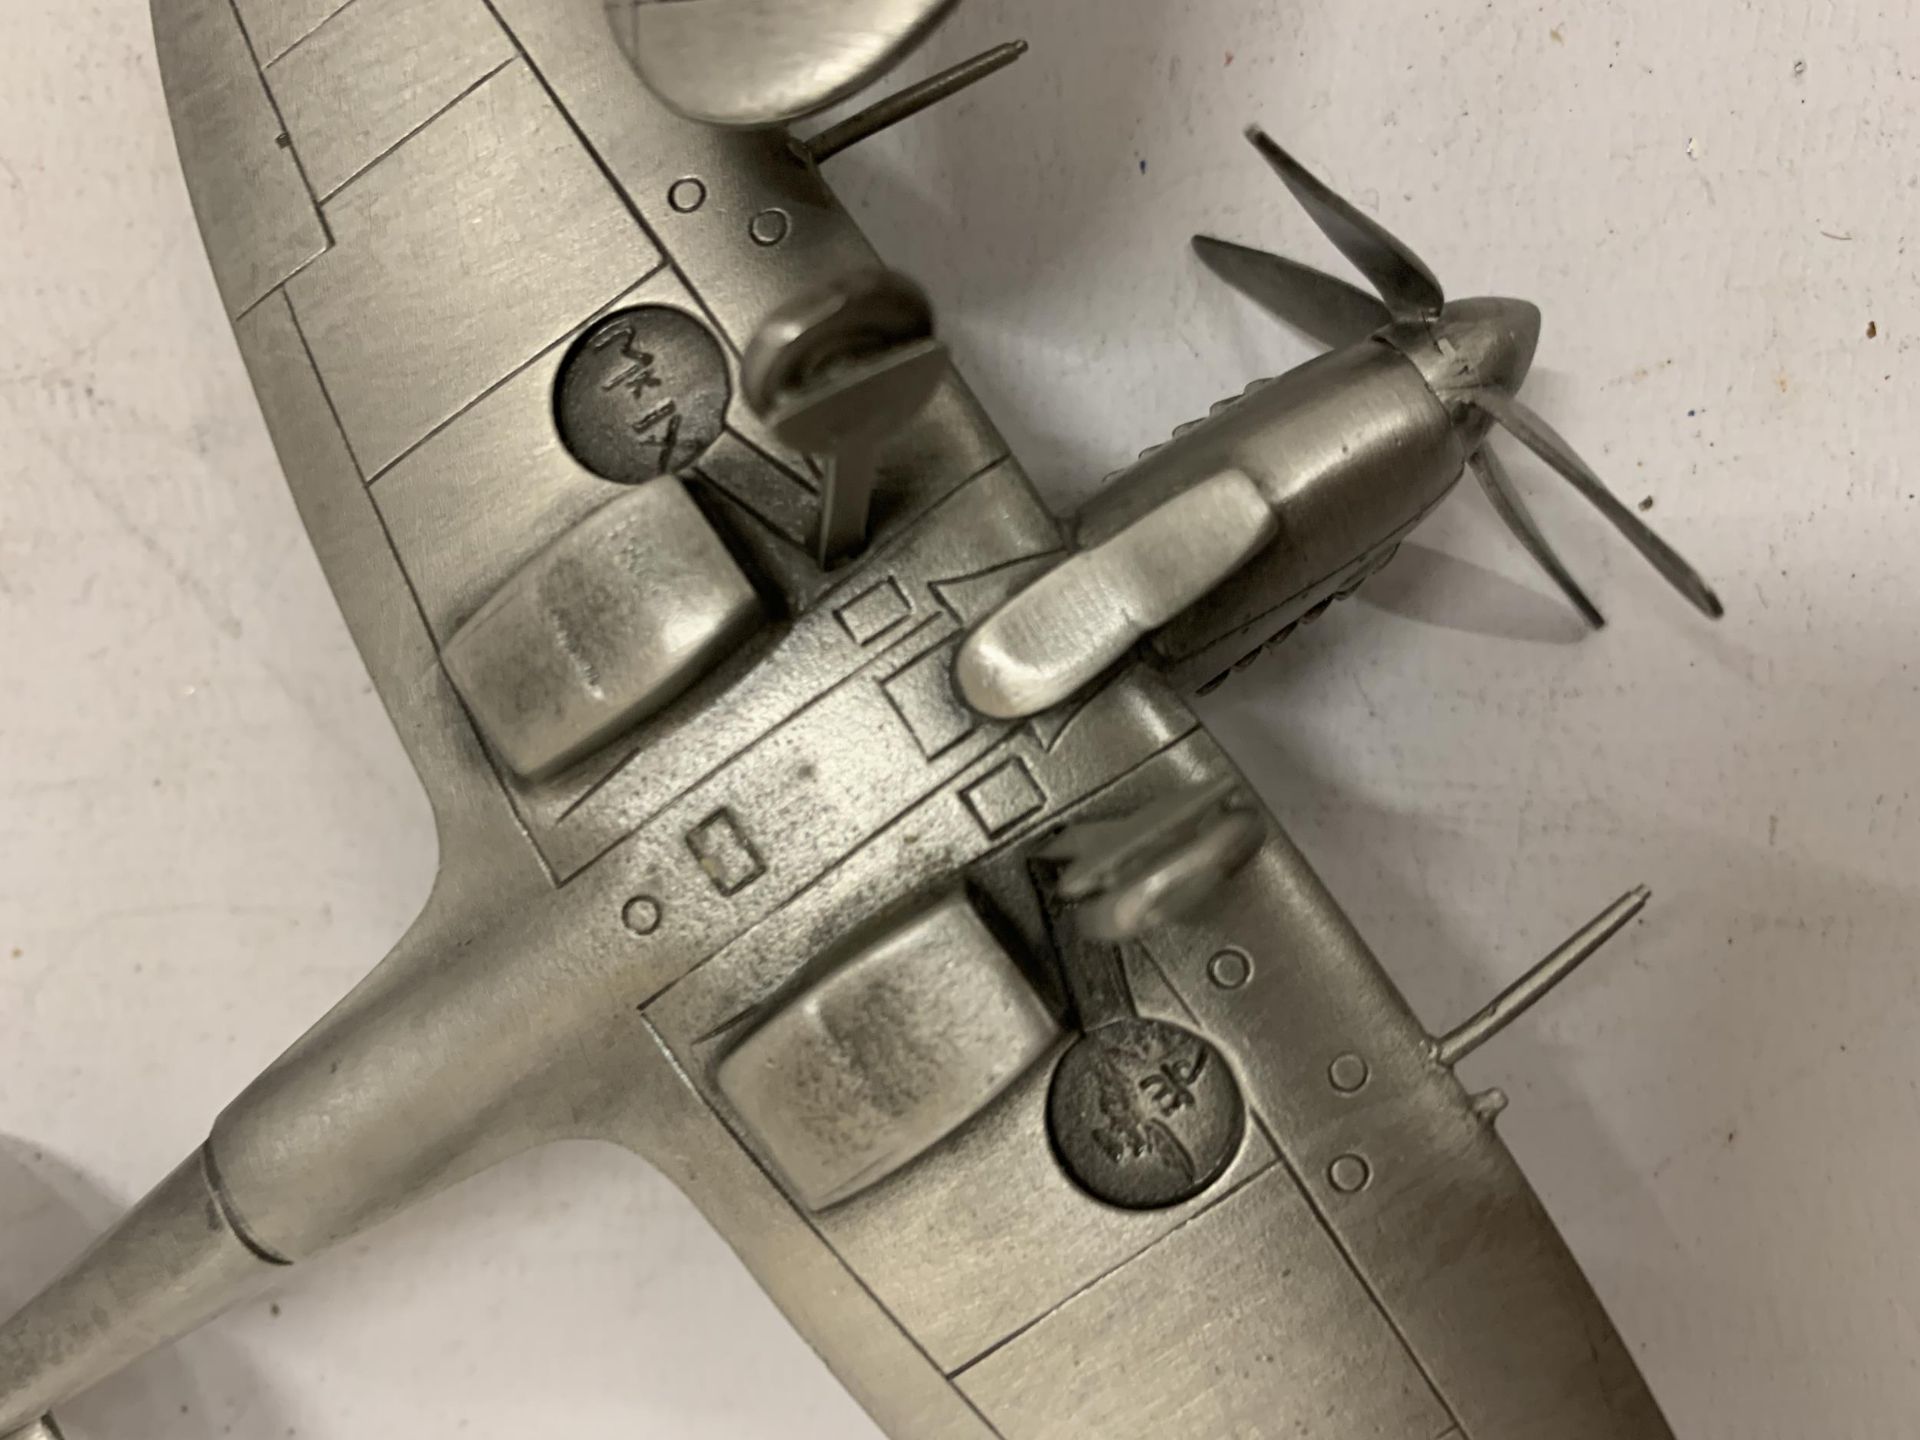 TWO PEWTER WORLD WAR 11 PLANES, A SPITFIRE AND HURRICANE - Image 6 of 6